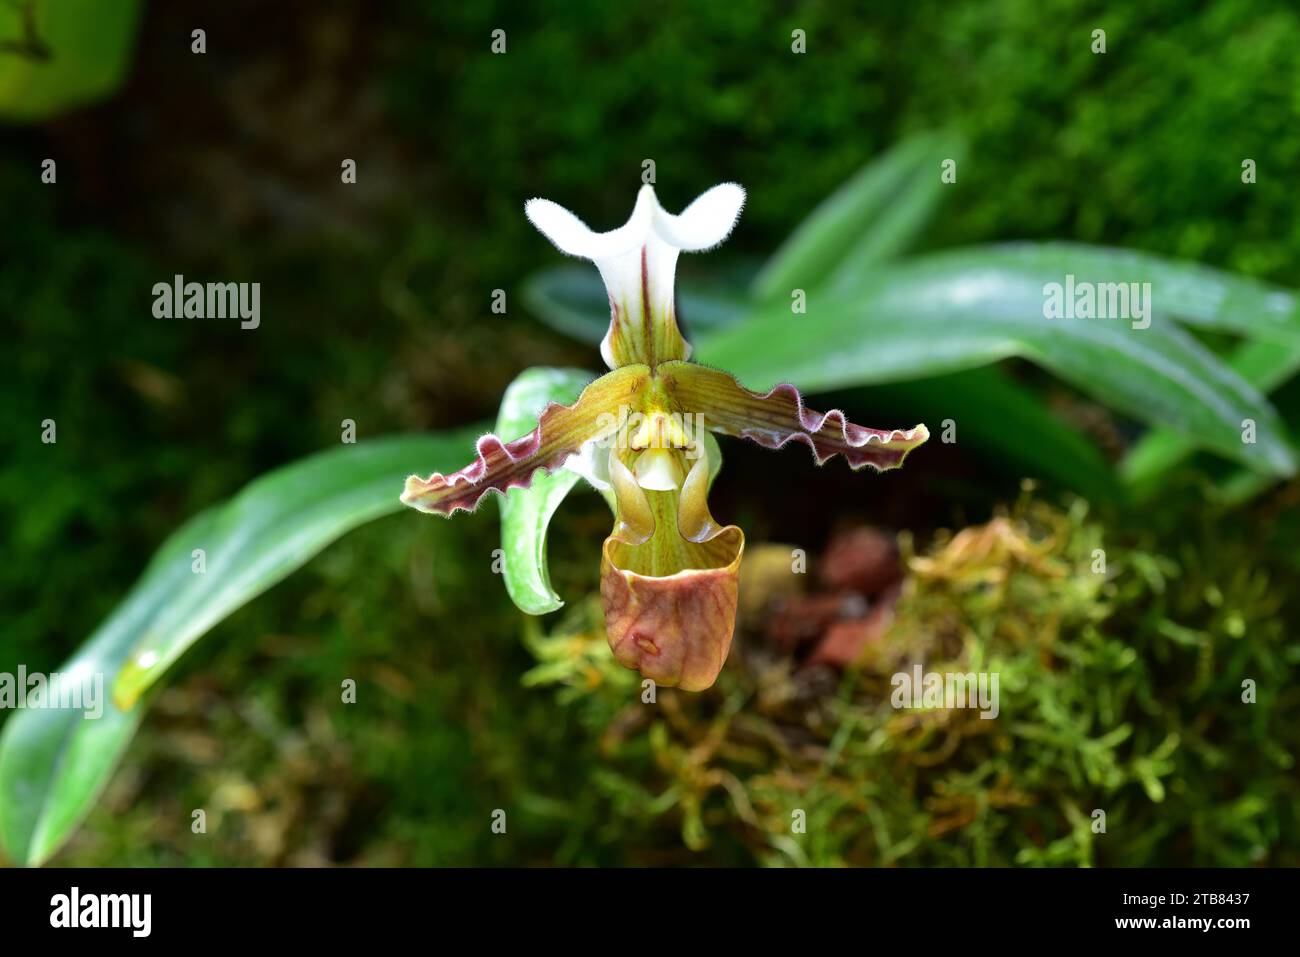 Paphiopedilum liemianum is an ornamental orchid endemic to Sumatra. Stock Photo